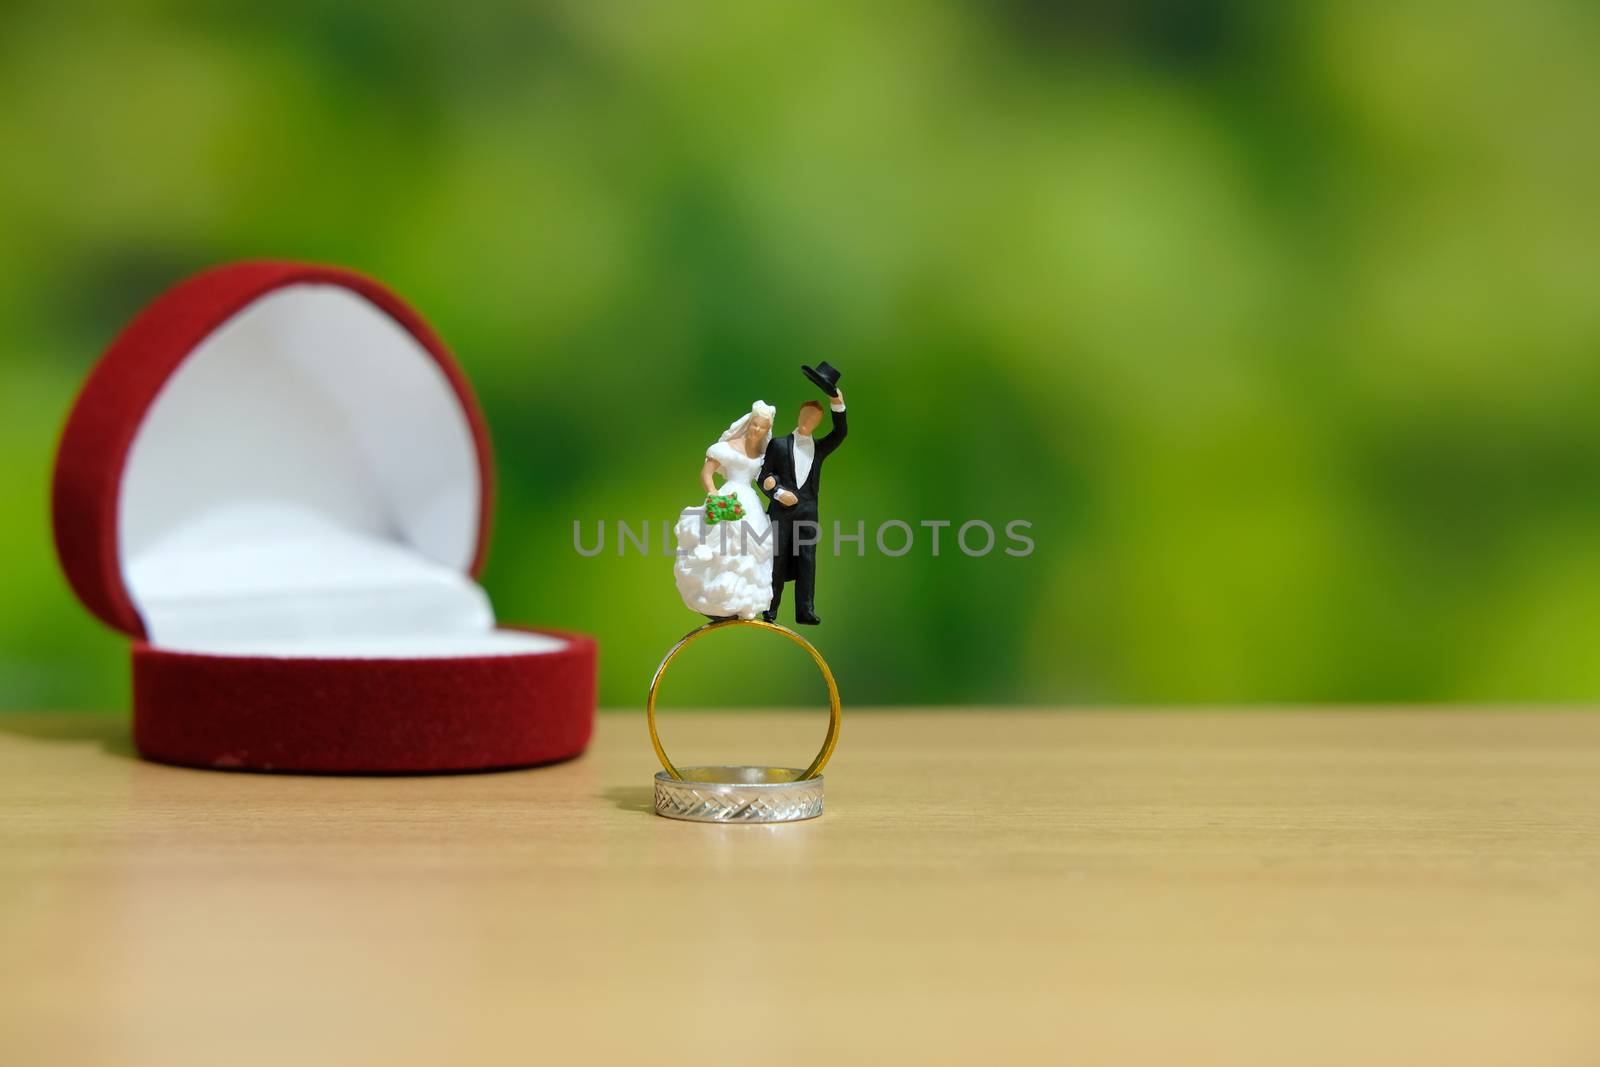 Miniature wedding concept. Bride and groom make greeting from above golden ring with dreamy green background by Macrostud